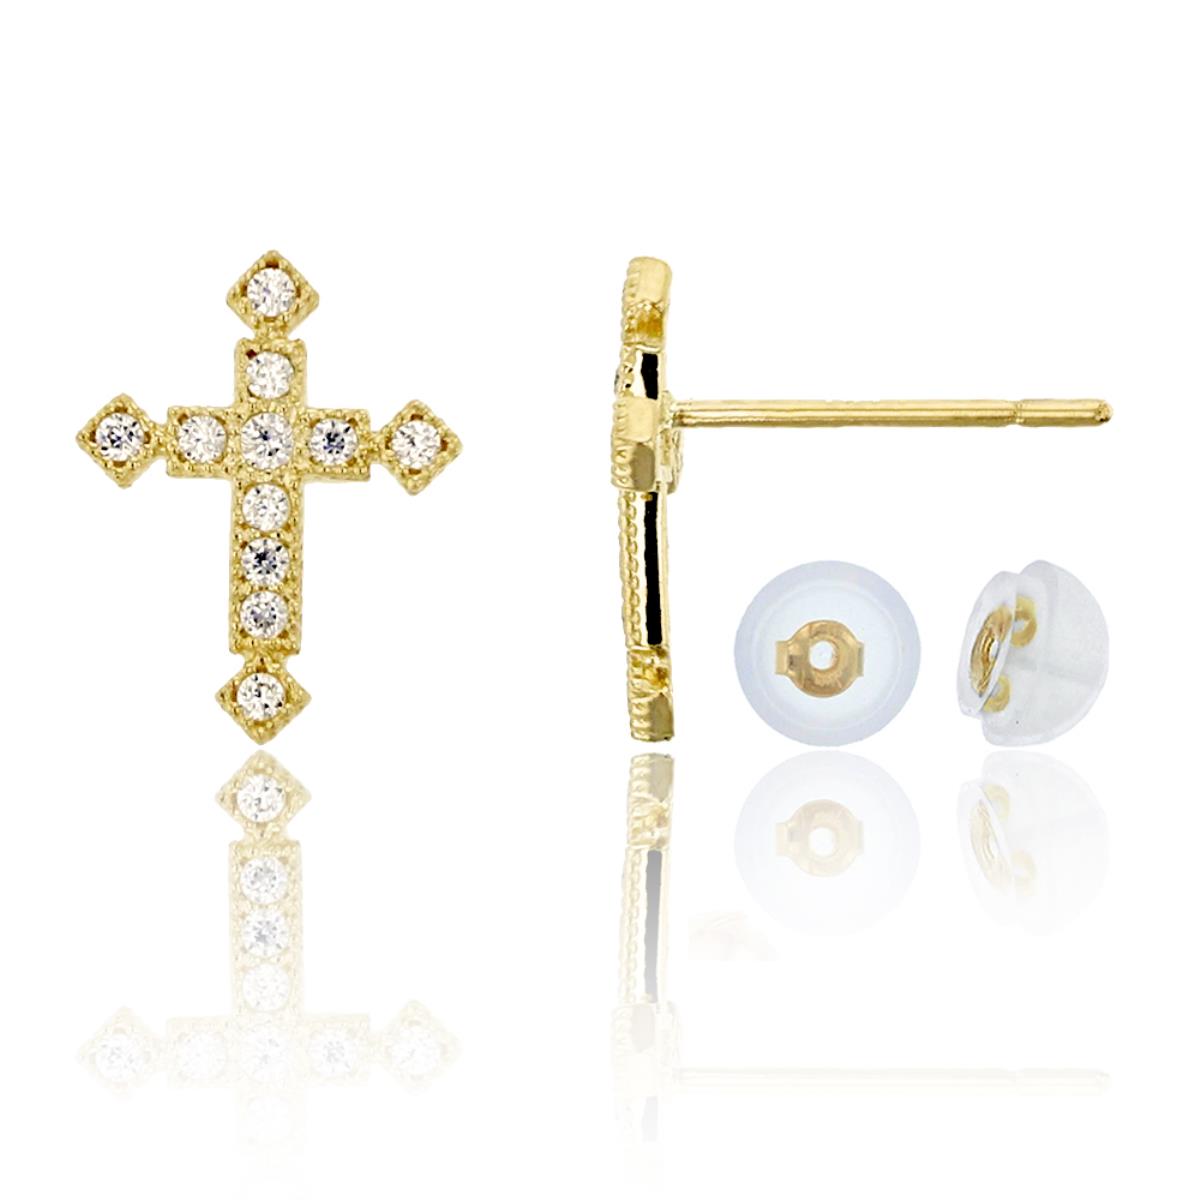 10K Yellow Gold Micropave 10x7mm Milgraine Cross CZ Earring & 10K Silicone Back